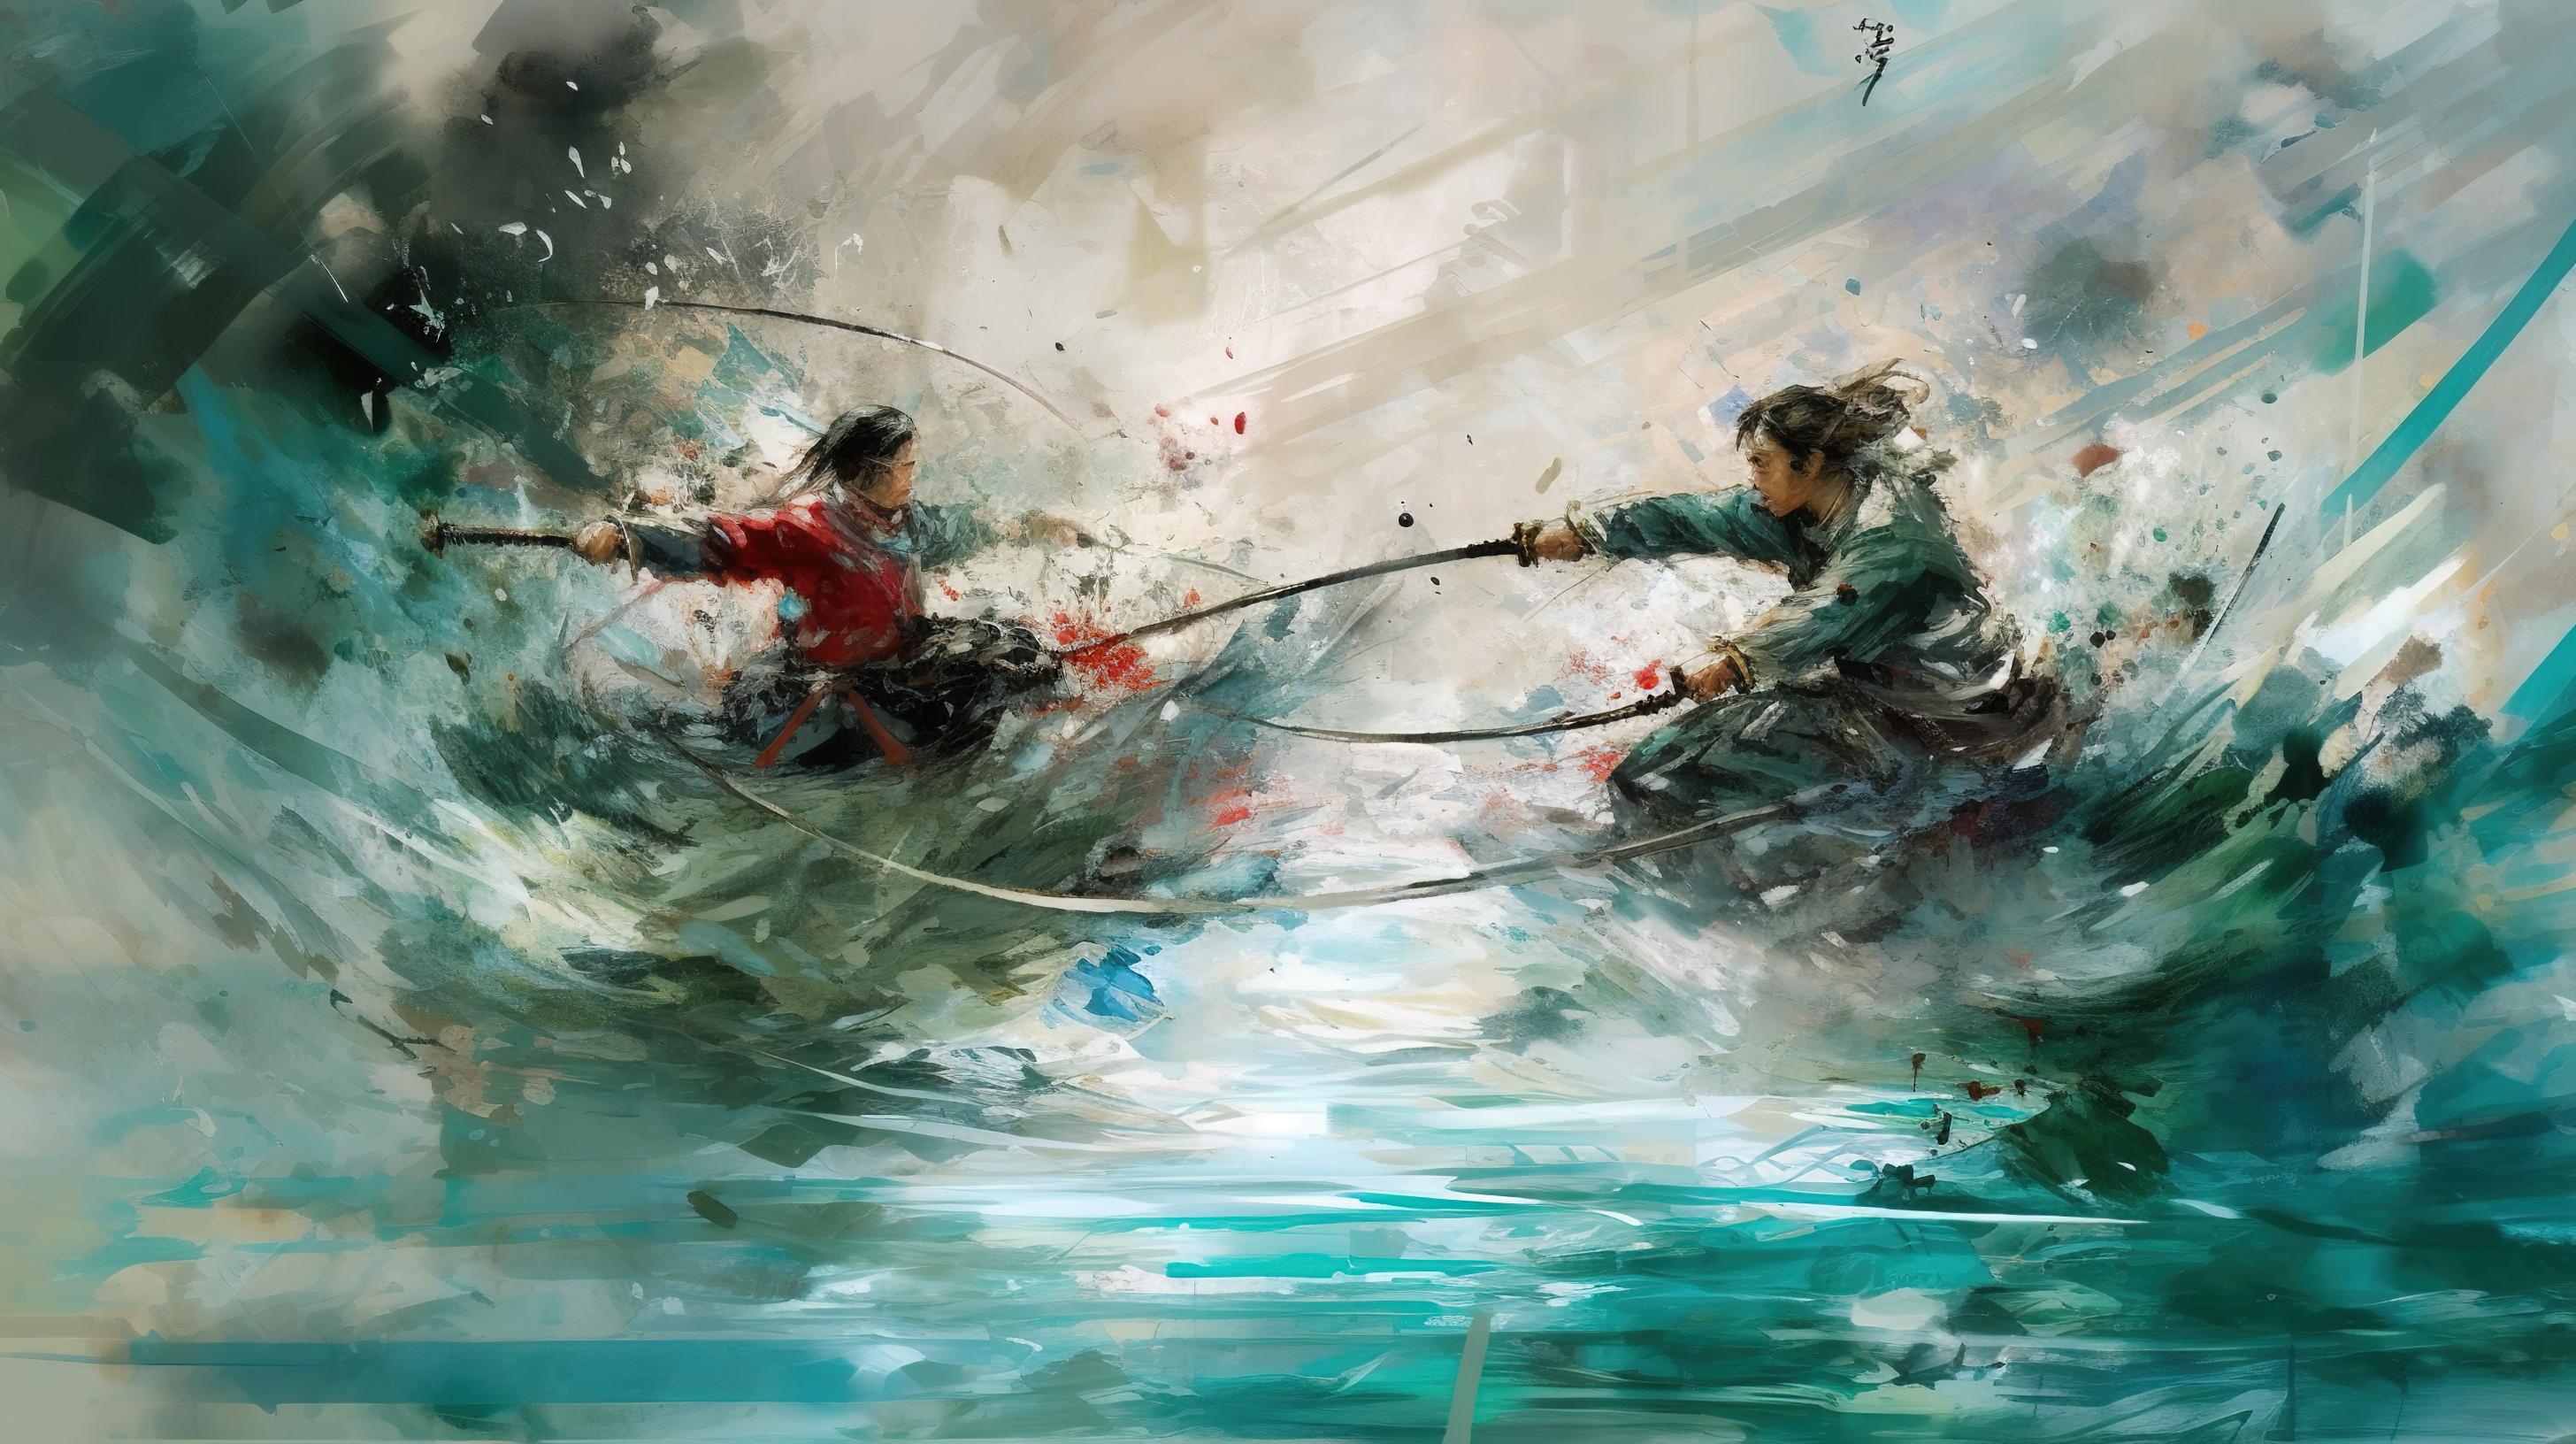 action_film_of_wo_swordsmen_fighting_by_wu_guanzhong_by_william-gigapixel-scale-2_00x_17.jpg